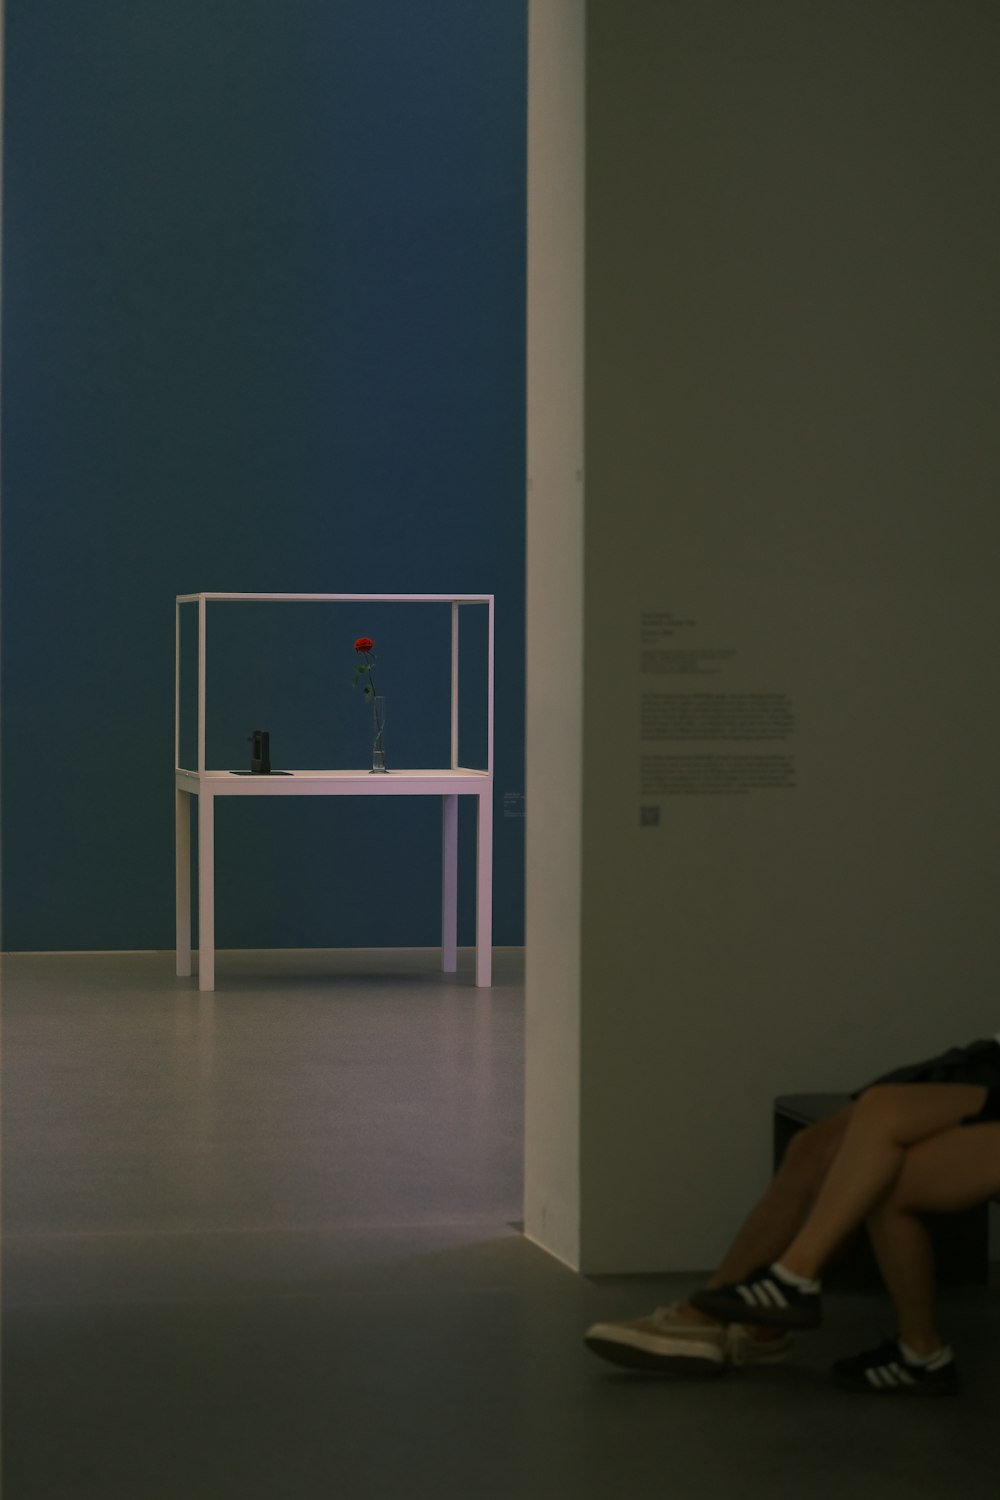 a woman sitting on a bench in a room